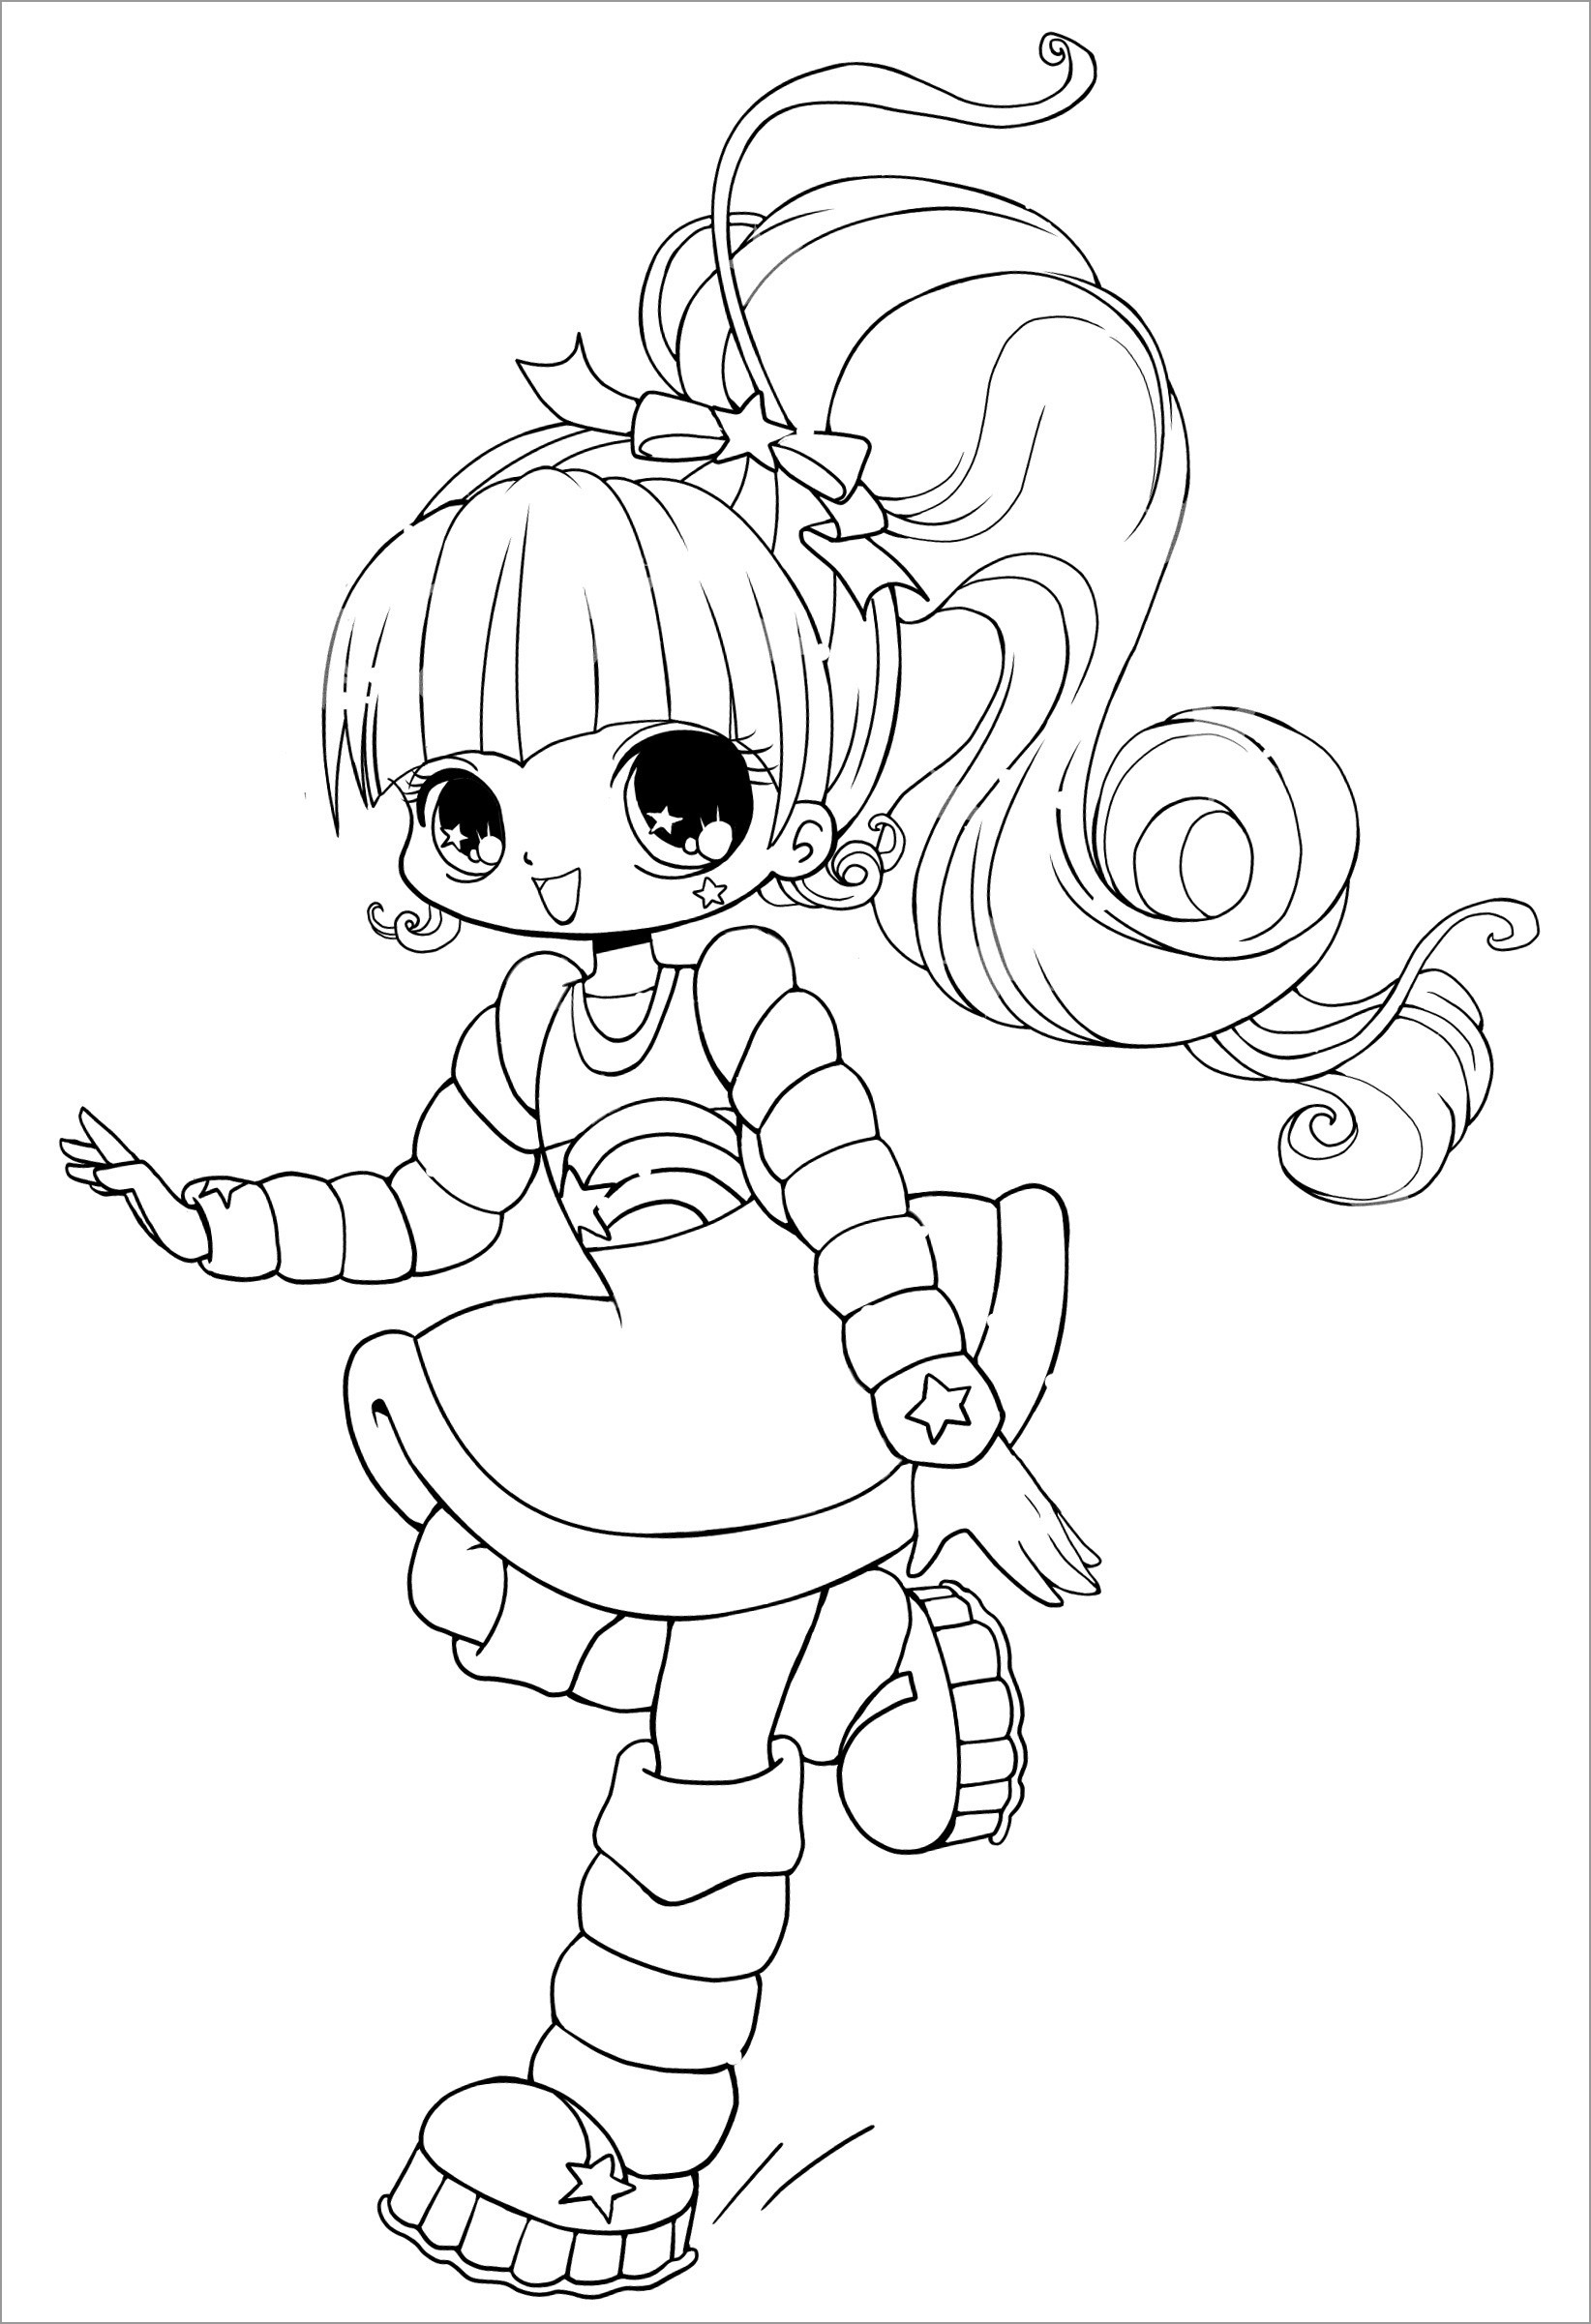 Cute Chibi Coloring Page for Kids